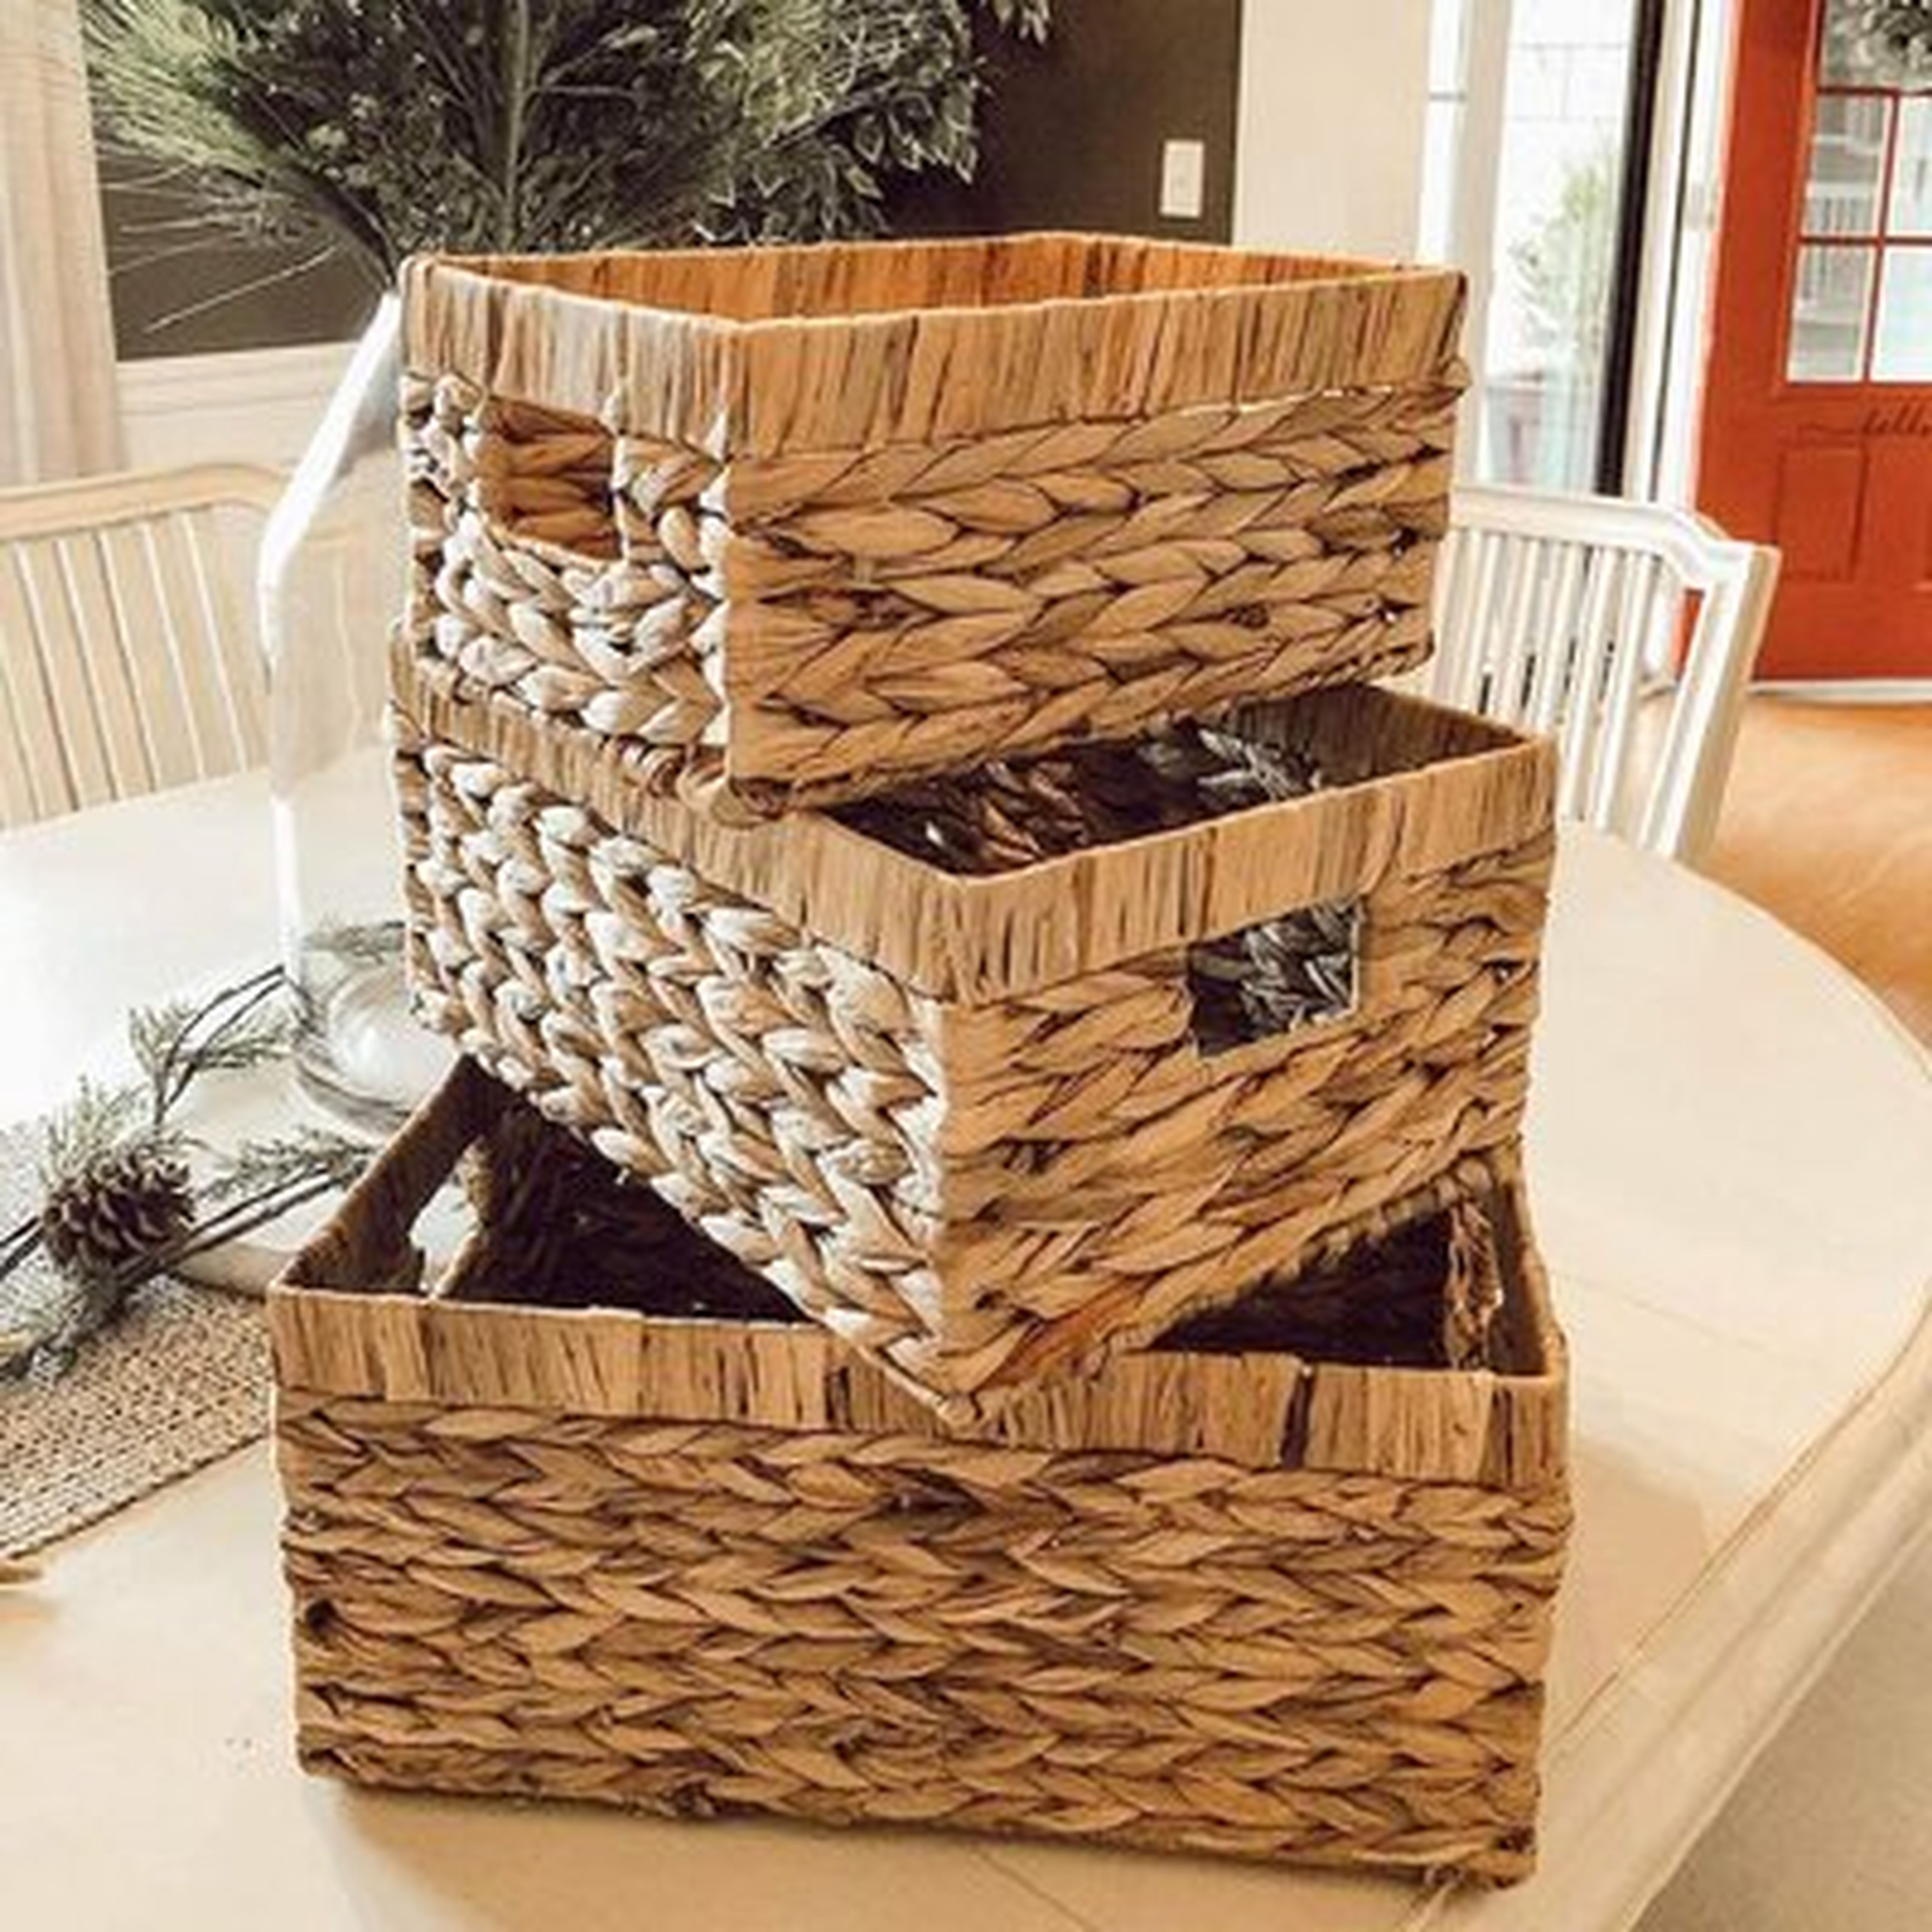 Set Of 3 Natural Water Hyacinth Nesting Storage Baskets Organizer Wicker Container Bins Boxes With Handle - (1 Large, 1 Medium, 1 Small) - Wayfair